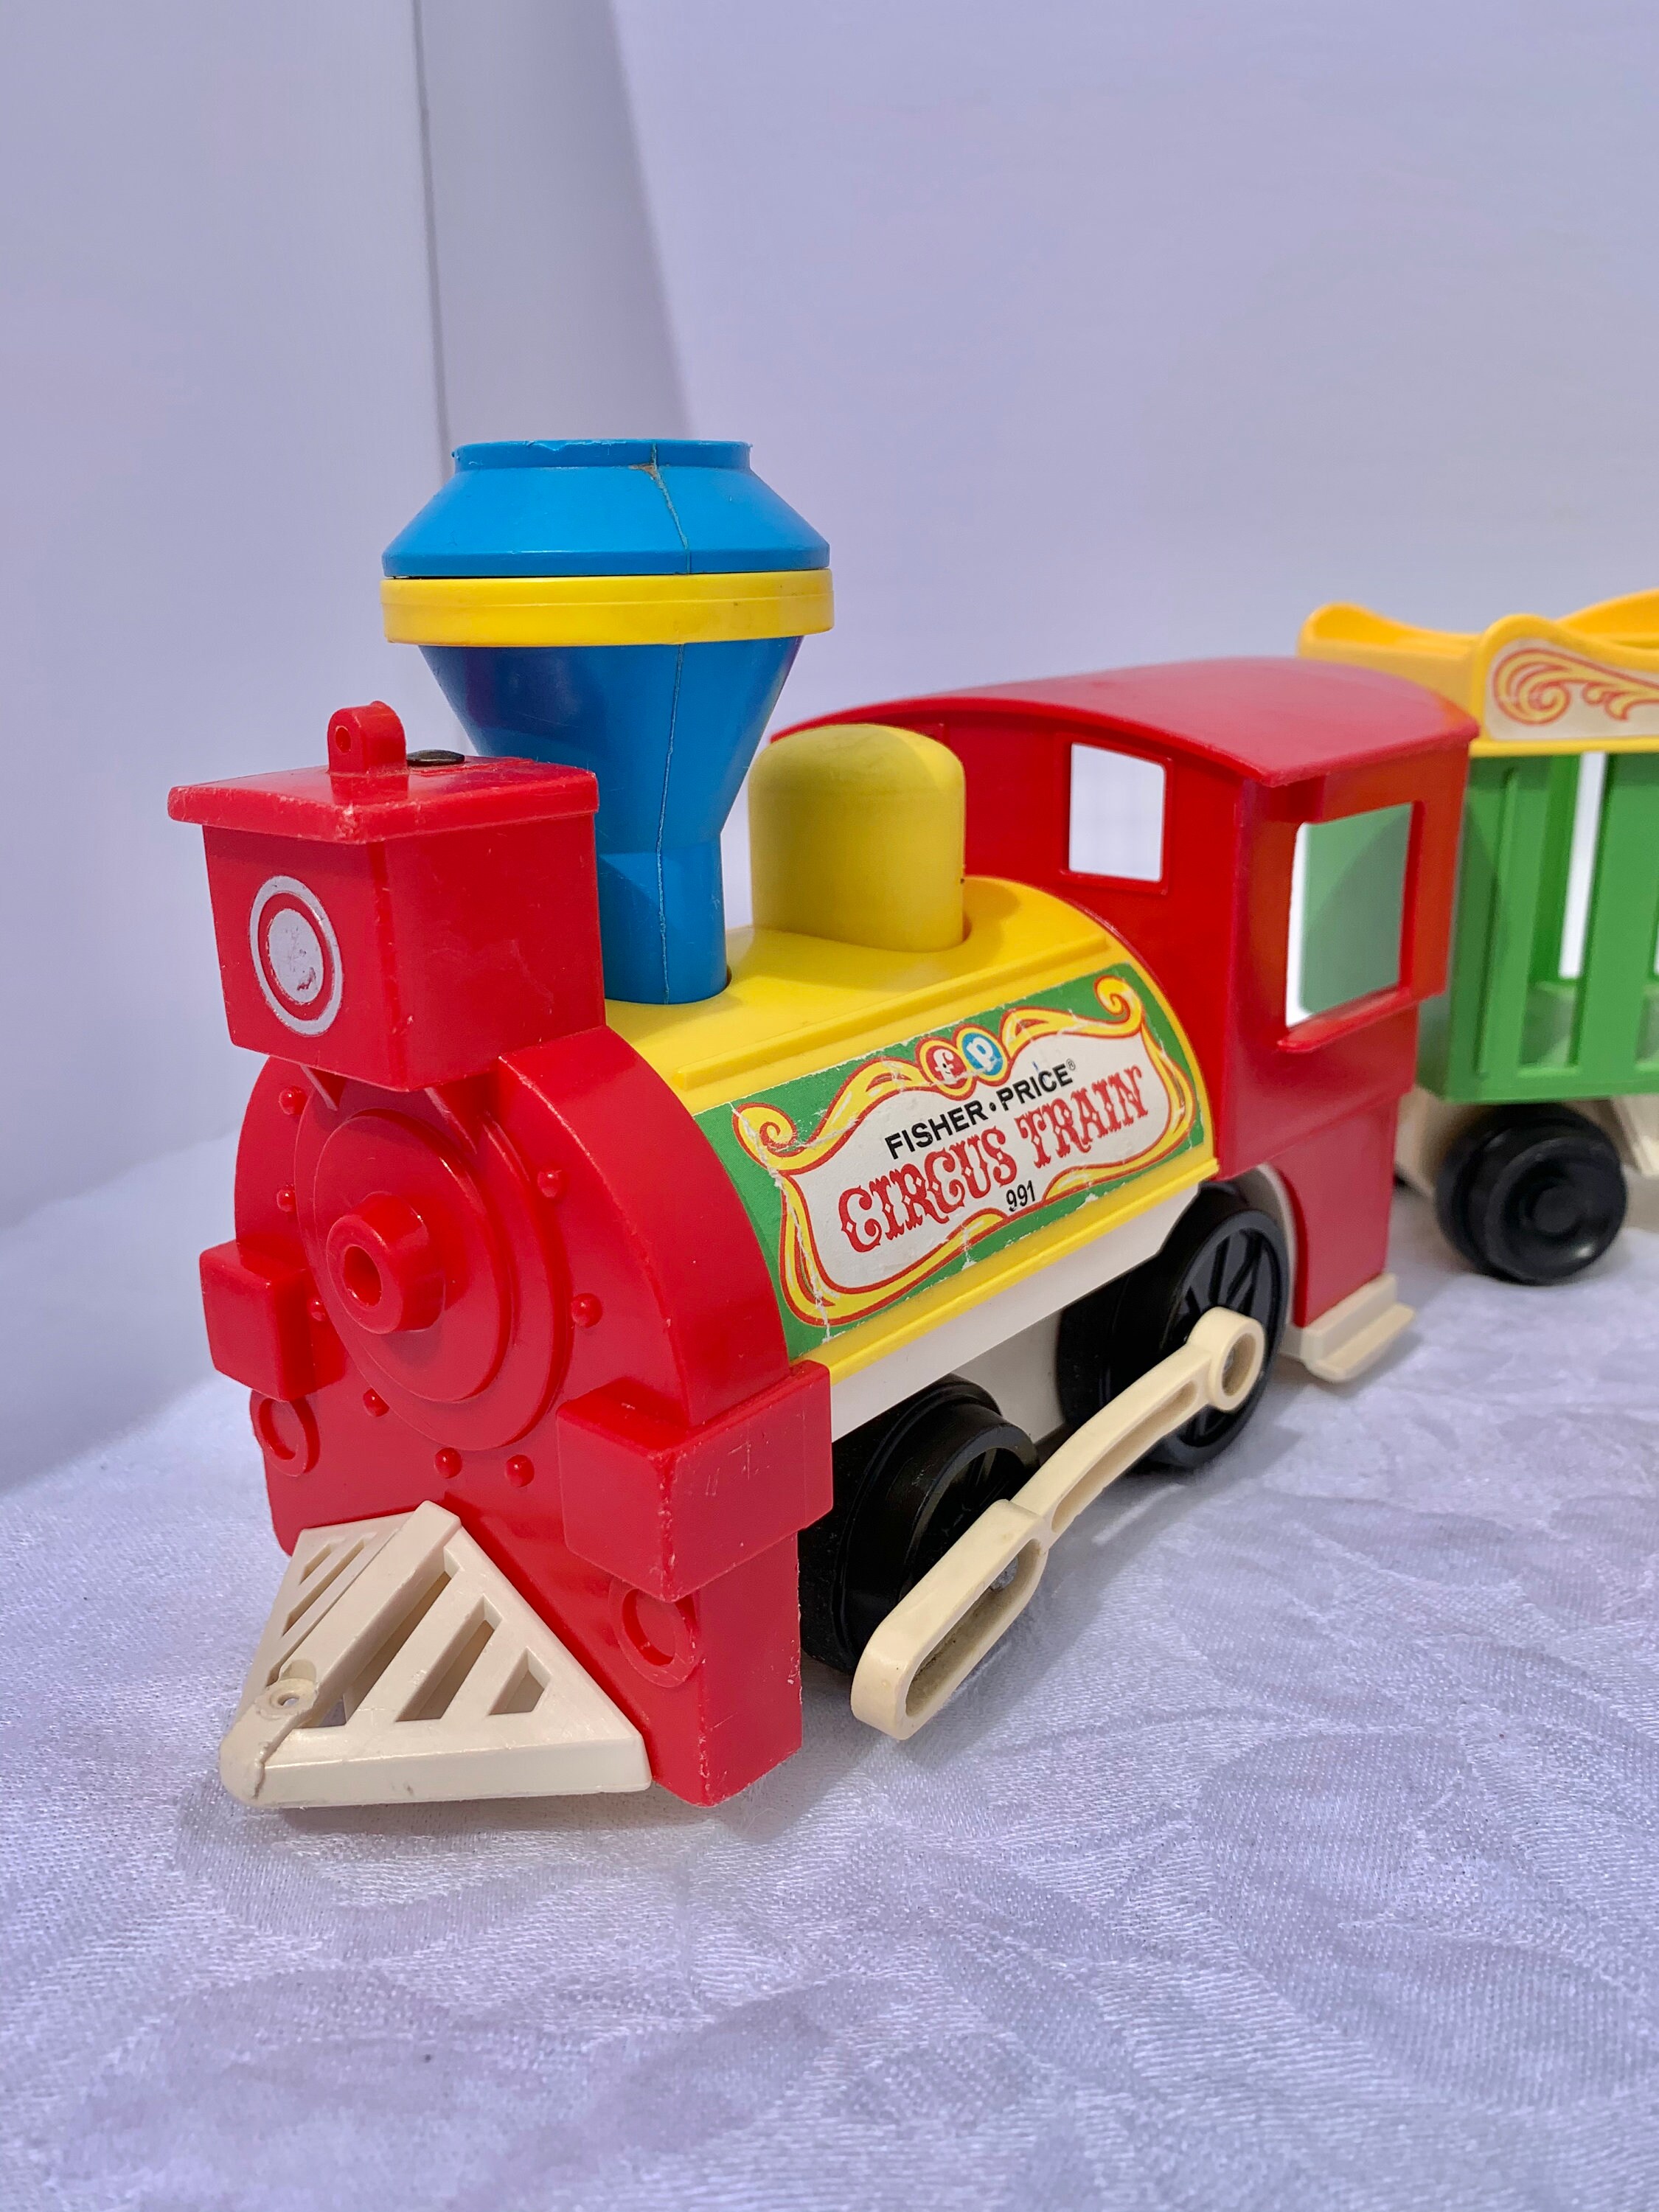 Fisher Price Circus Train 991 Little People Play Family | Etsy